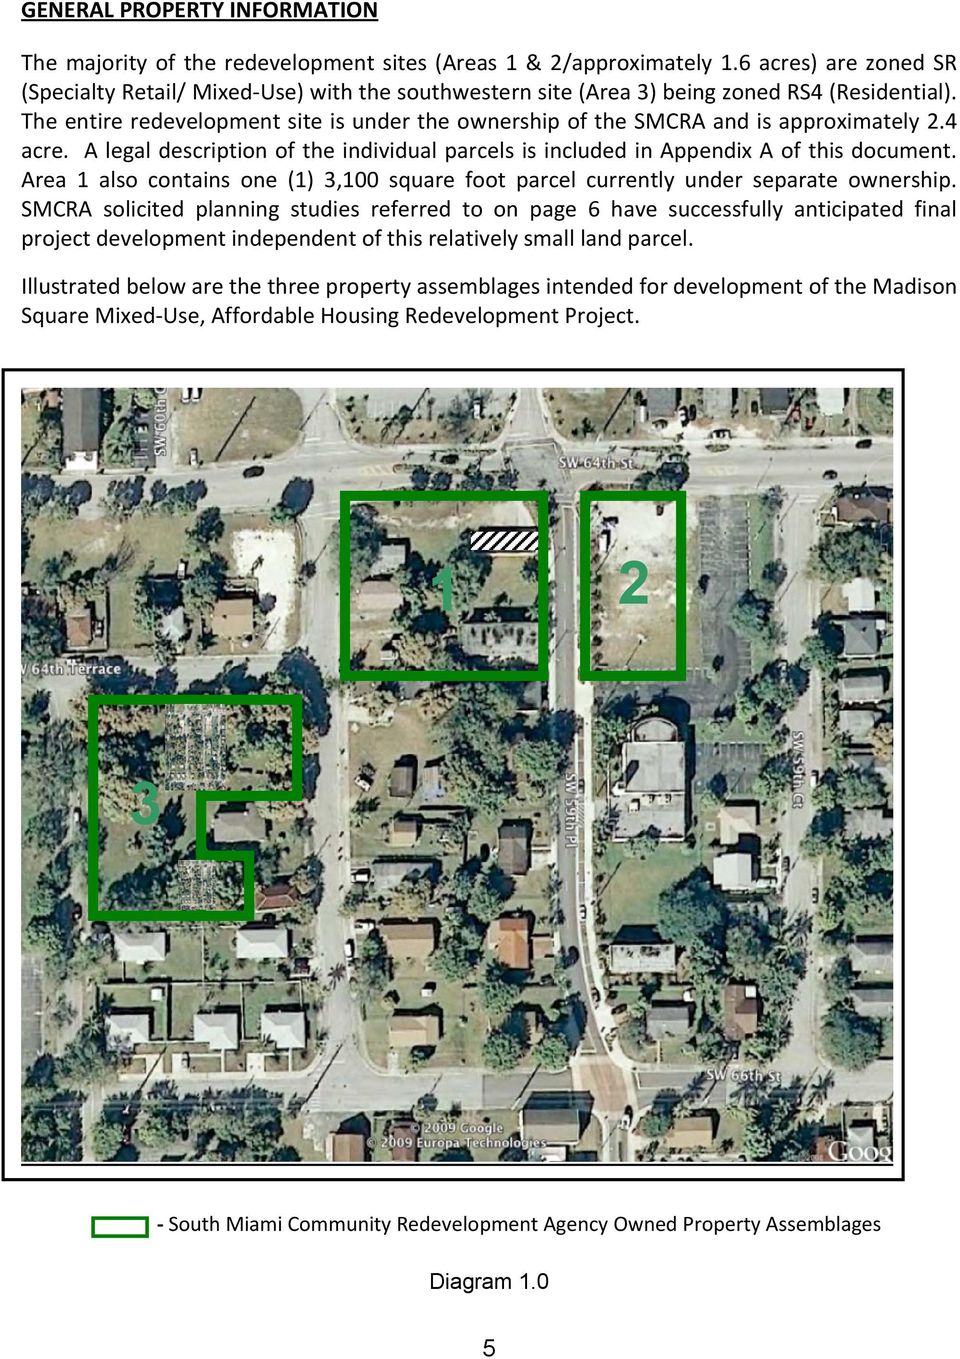 The entire redevelopment site is under the ownership of the SMCRA and is approximately 2.4 acre. A legal description of the individual parcels is included in Appendix A of this document.